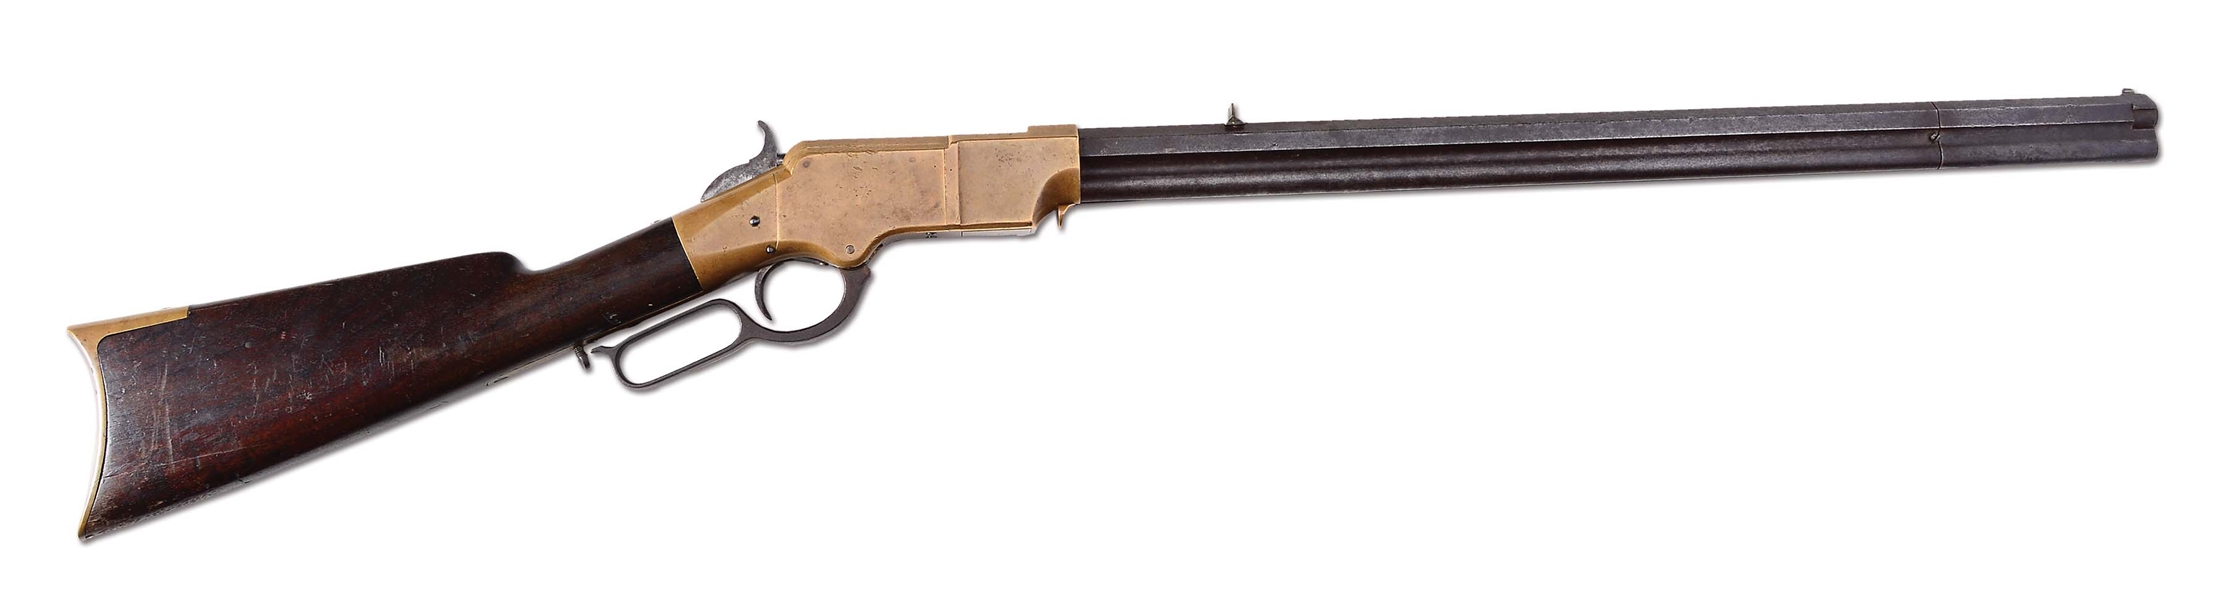 (A) NEW HAVEN ARMS CO. HENRY MODEL 1860 LEVER ACTION RIFLE (1864).